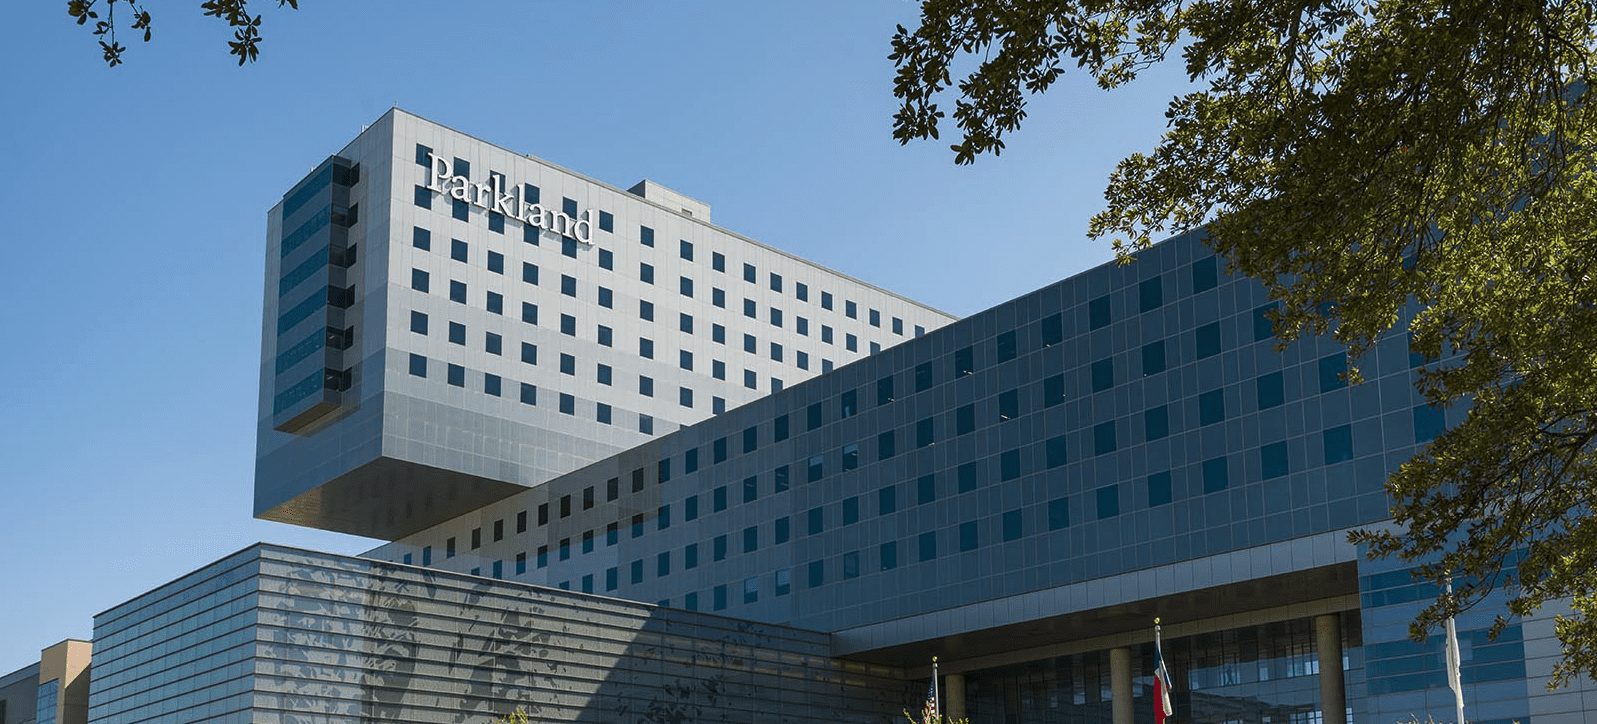 Parkland Hospital Consolidating Clinics to Expand Services